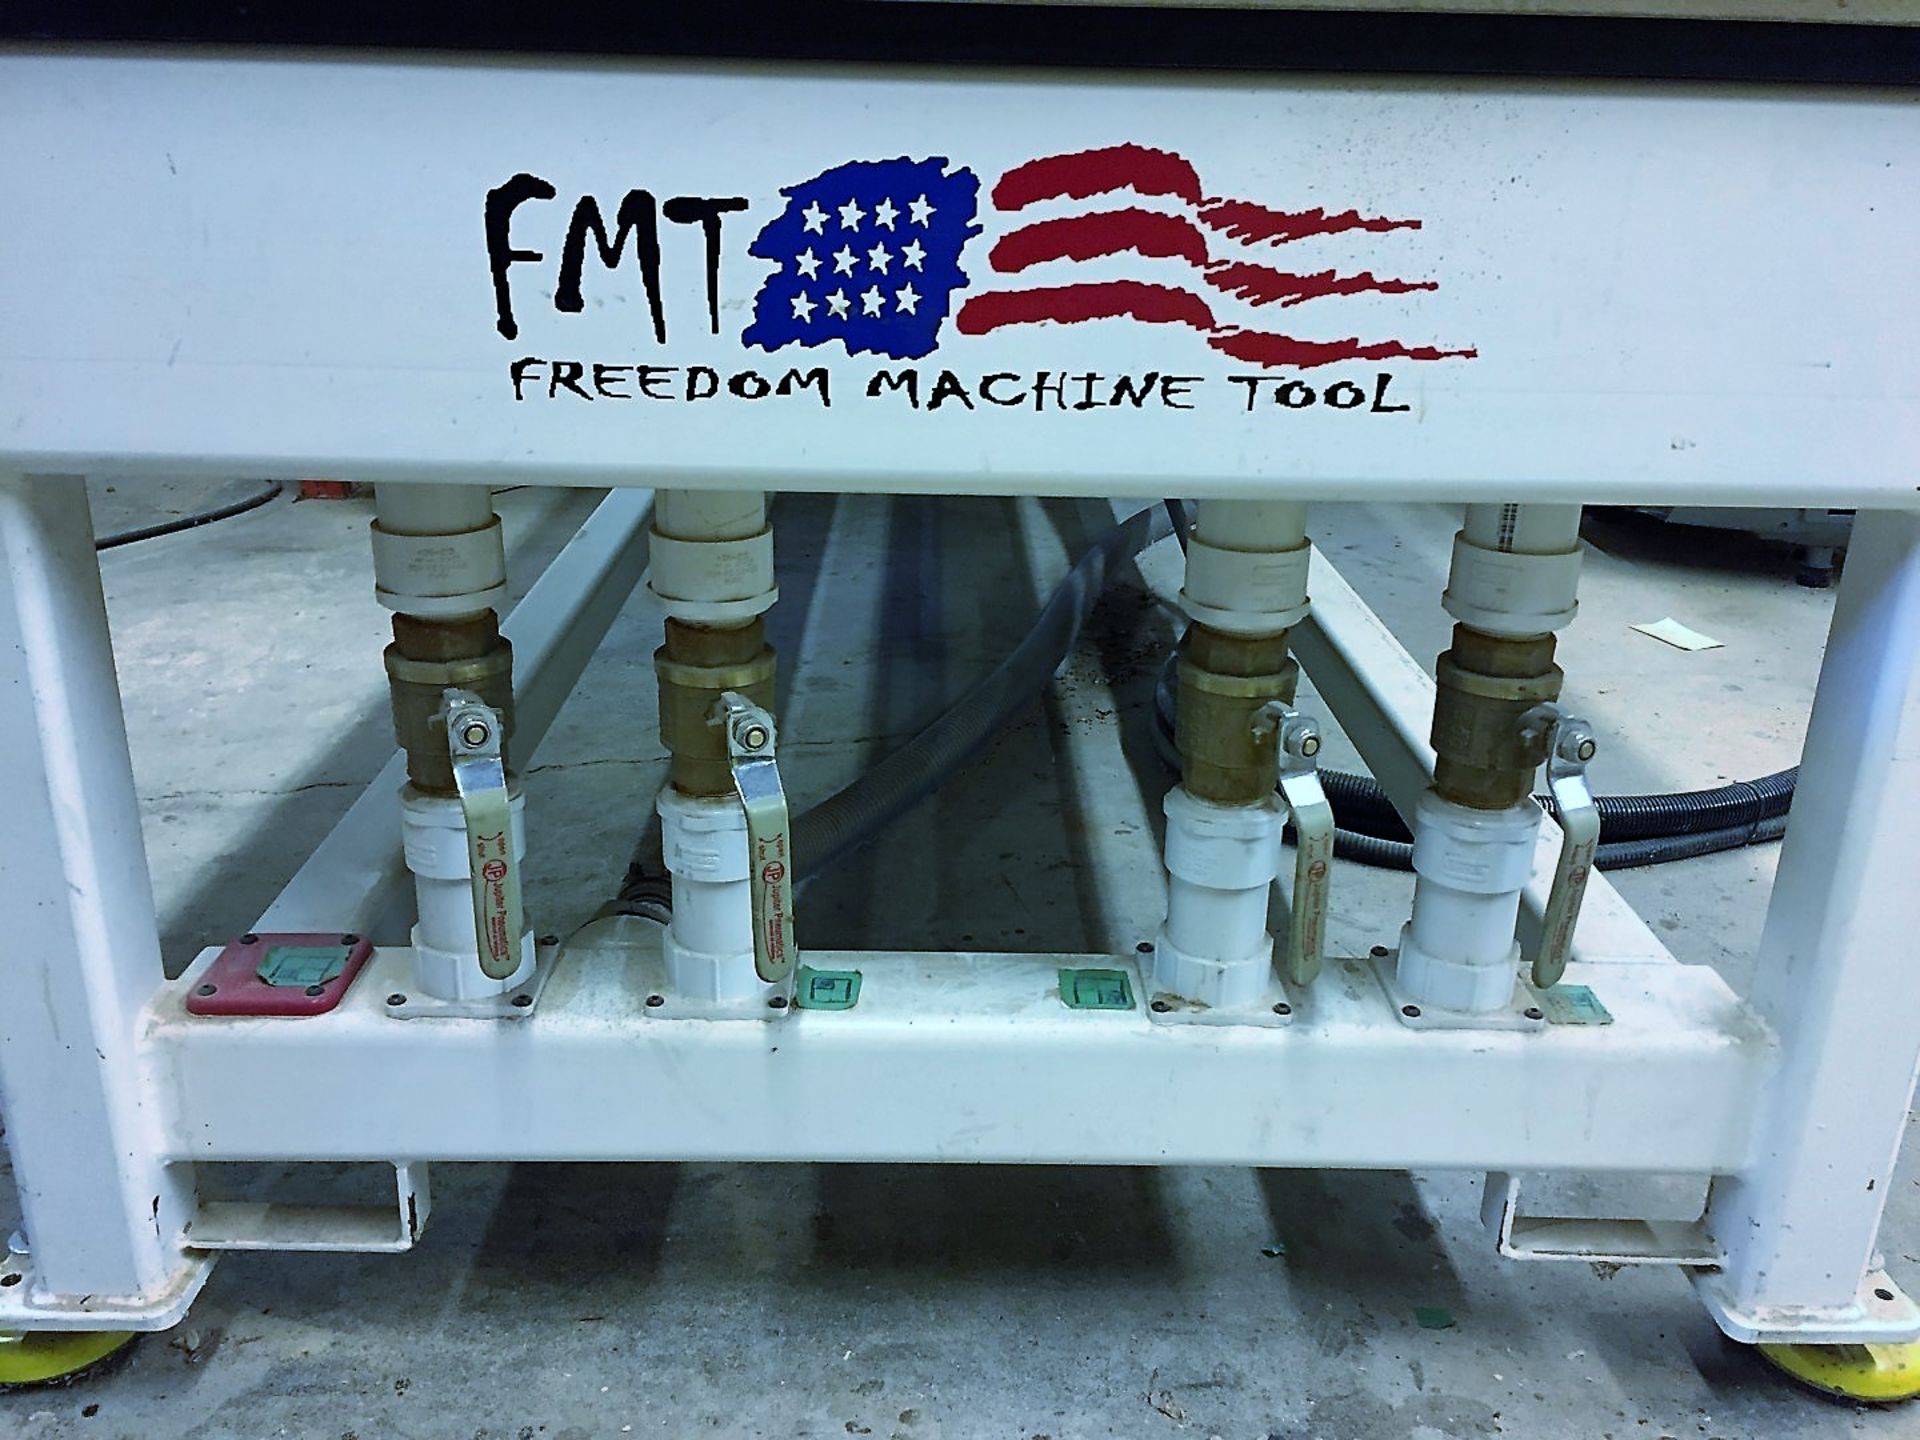 4'x8' Freedom Machine Model FMT-F35-4-8-7 CNC Router, S/N 40G&, New 2012 - Image 5 of 11